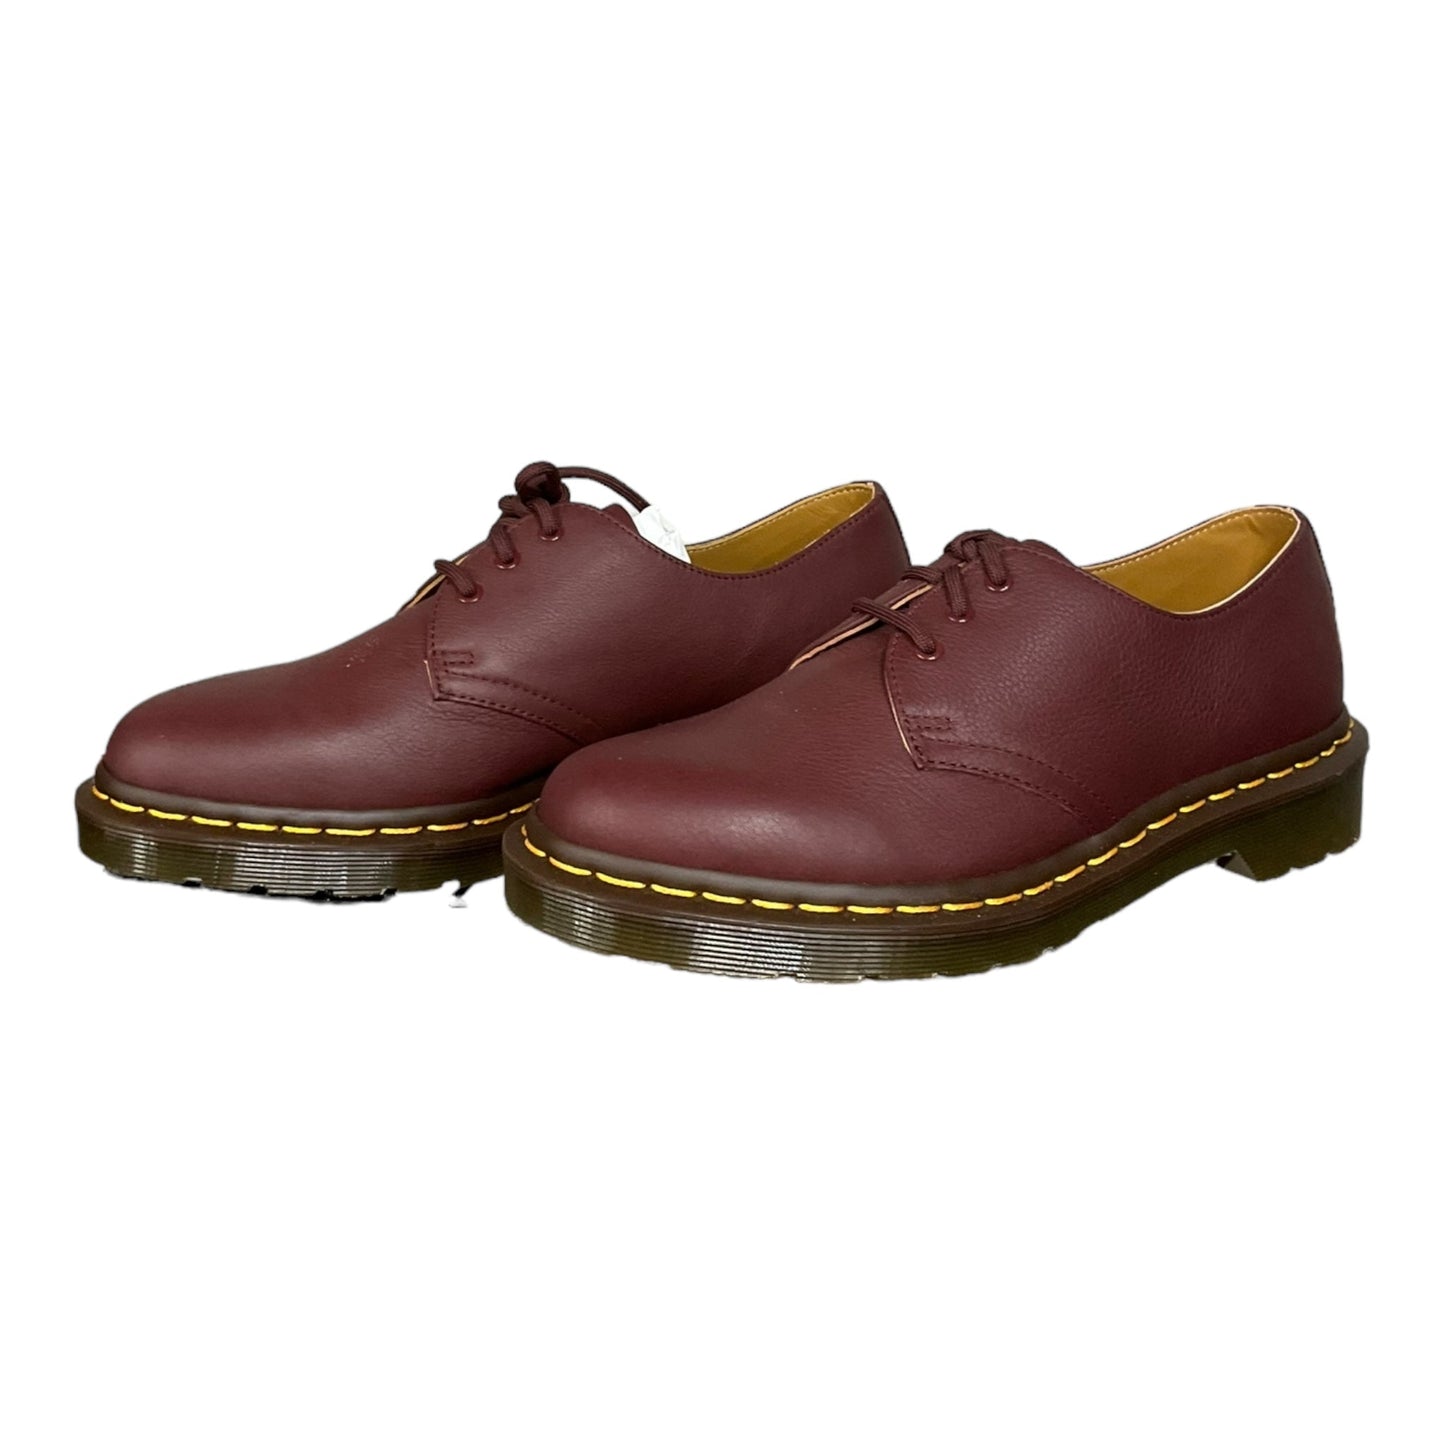 Red Shoes Flats Dr Martens, Size 8